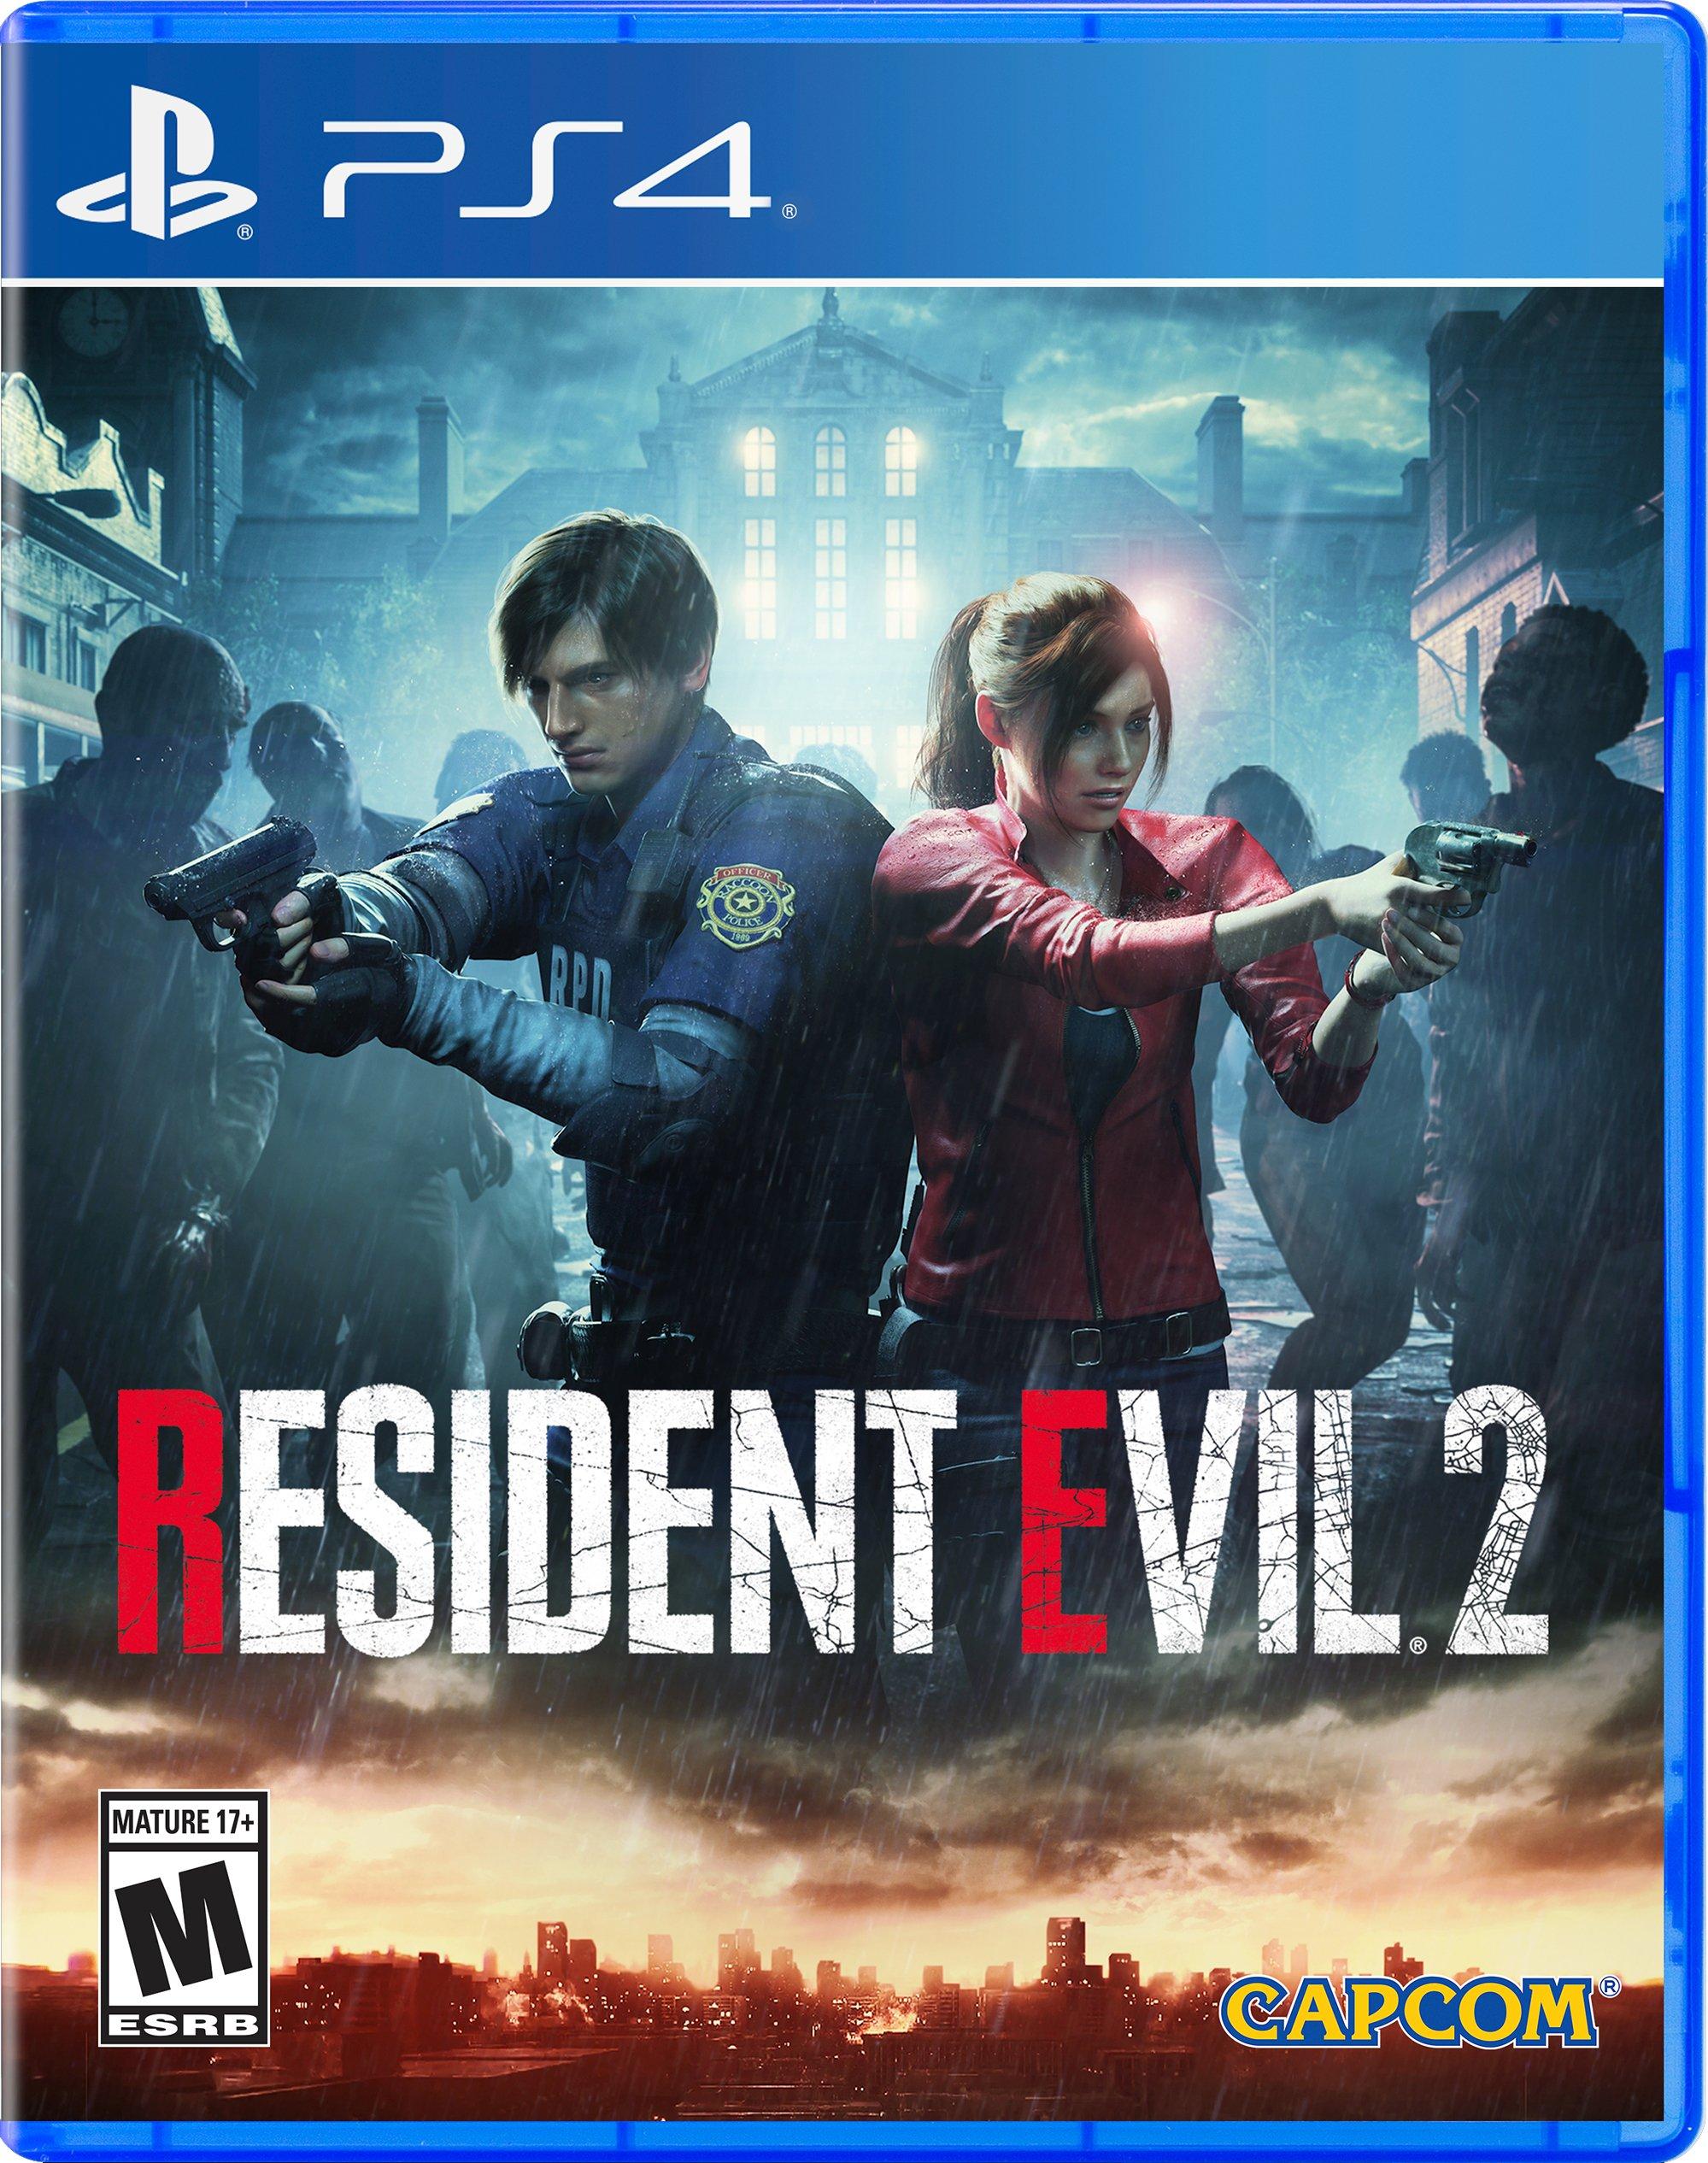  Resident Evil 2 - PlayStation 4 Deluxe Edition : Video Games